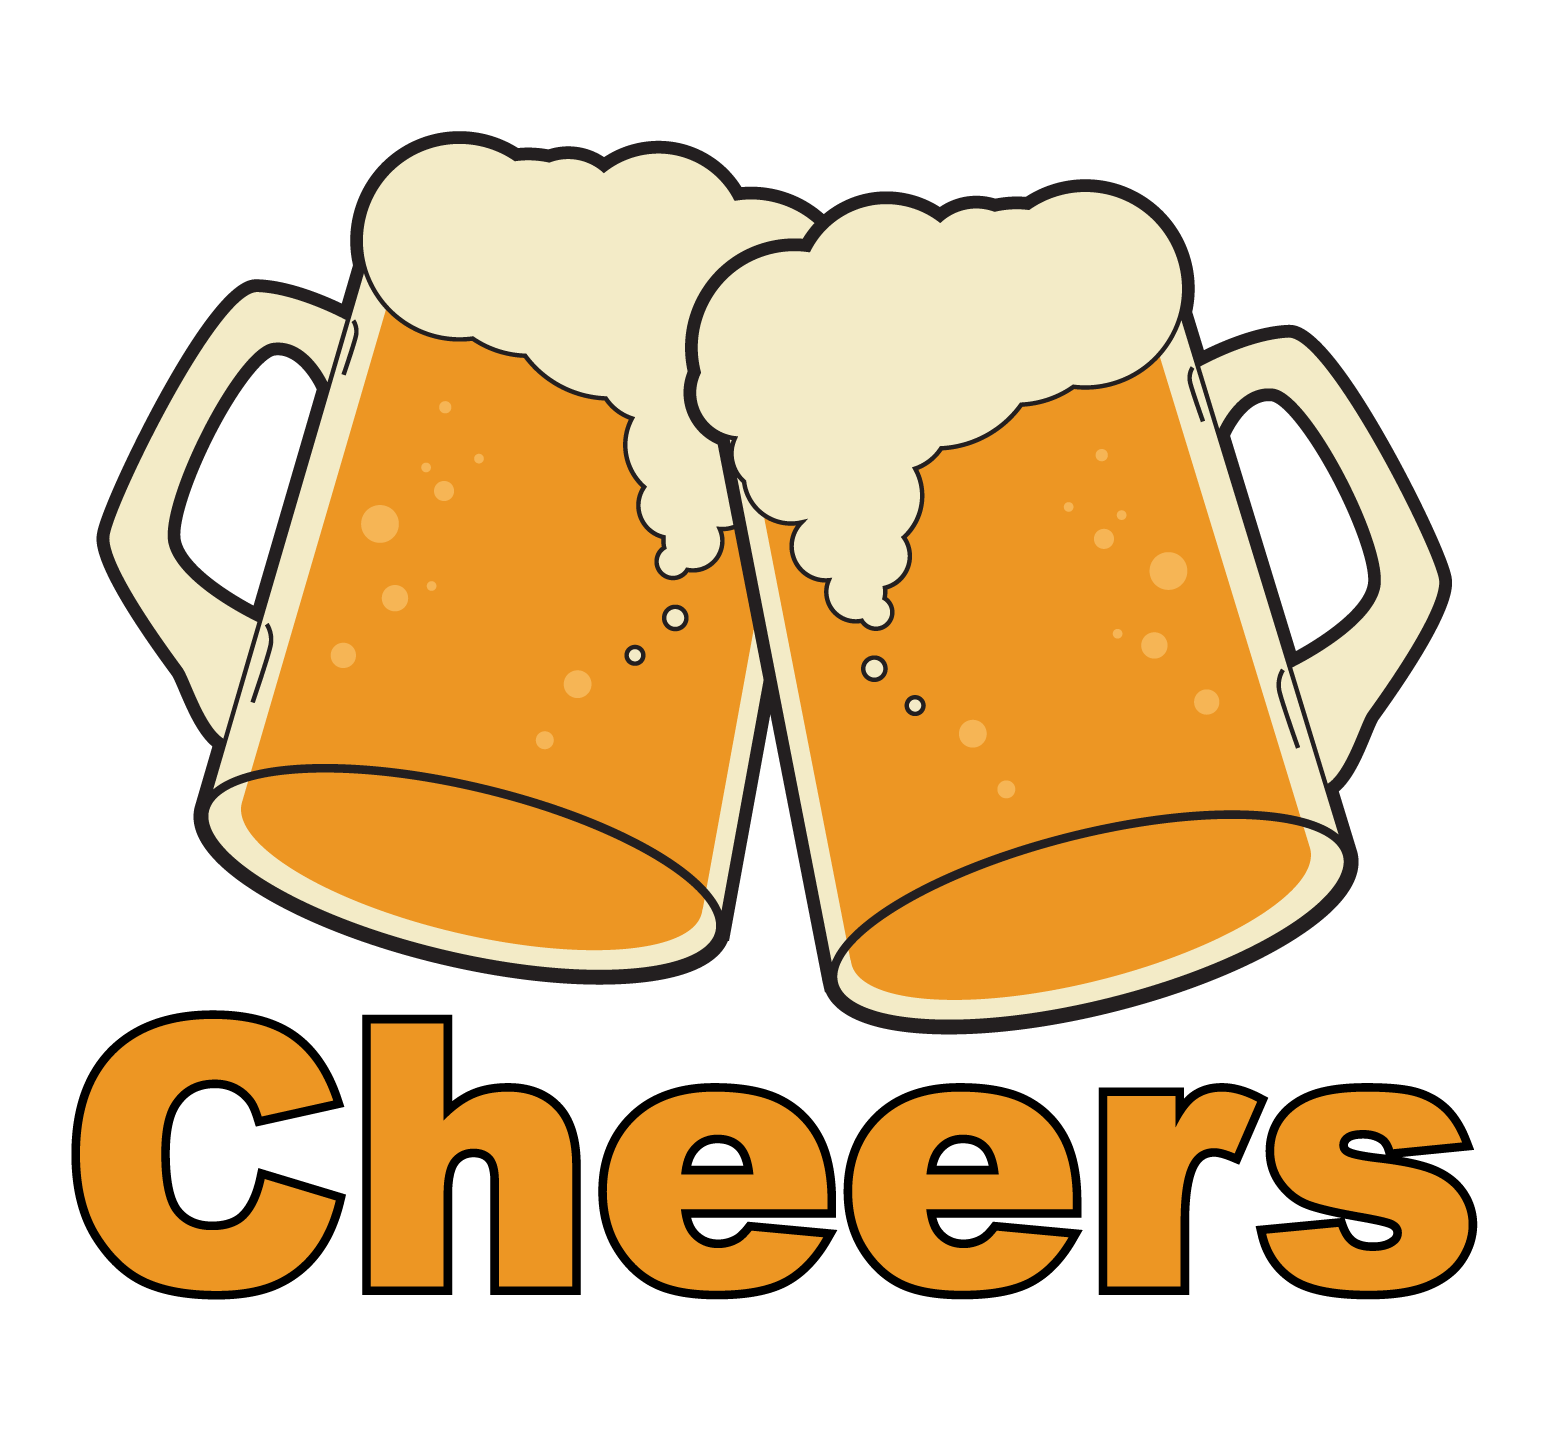 Beer cheers clipart png